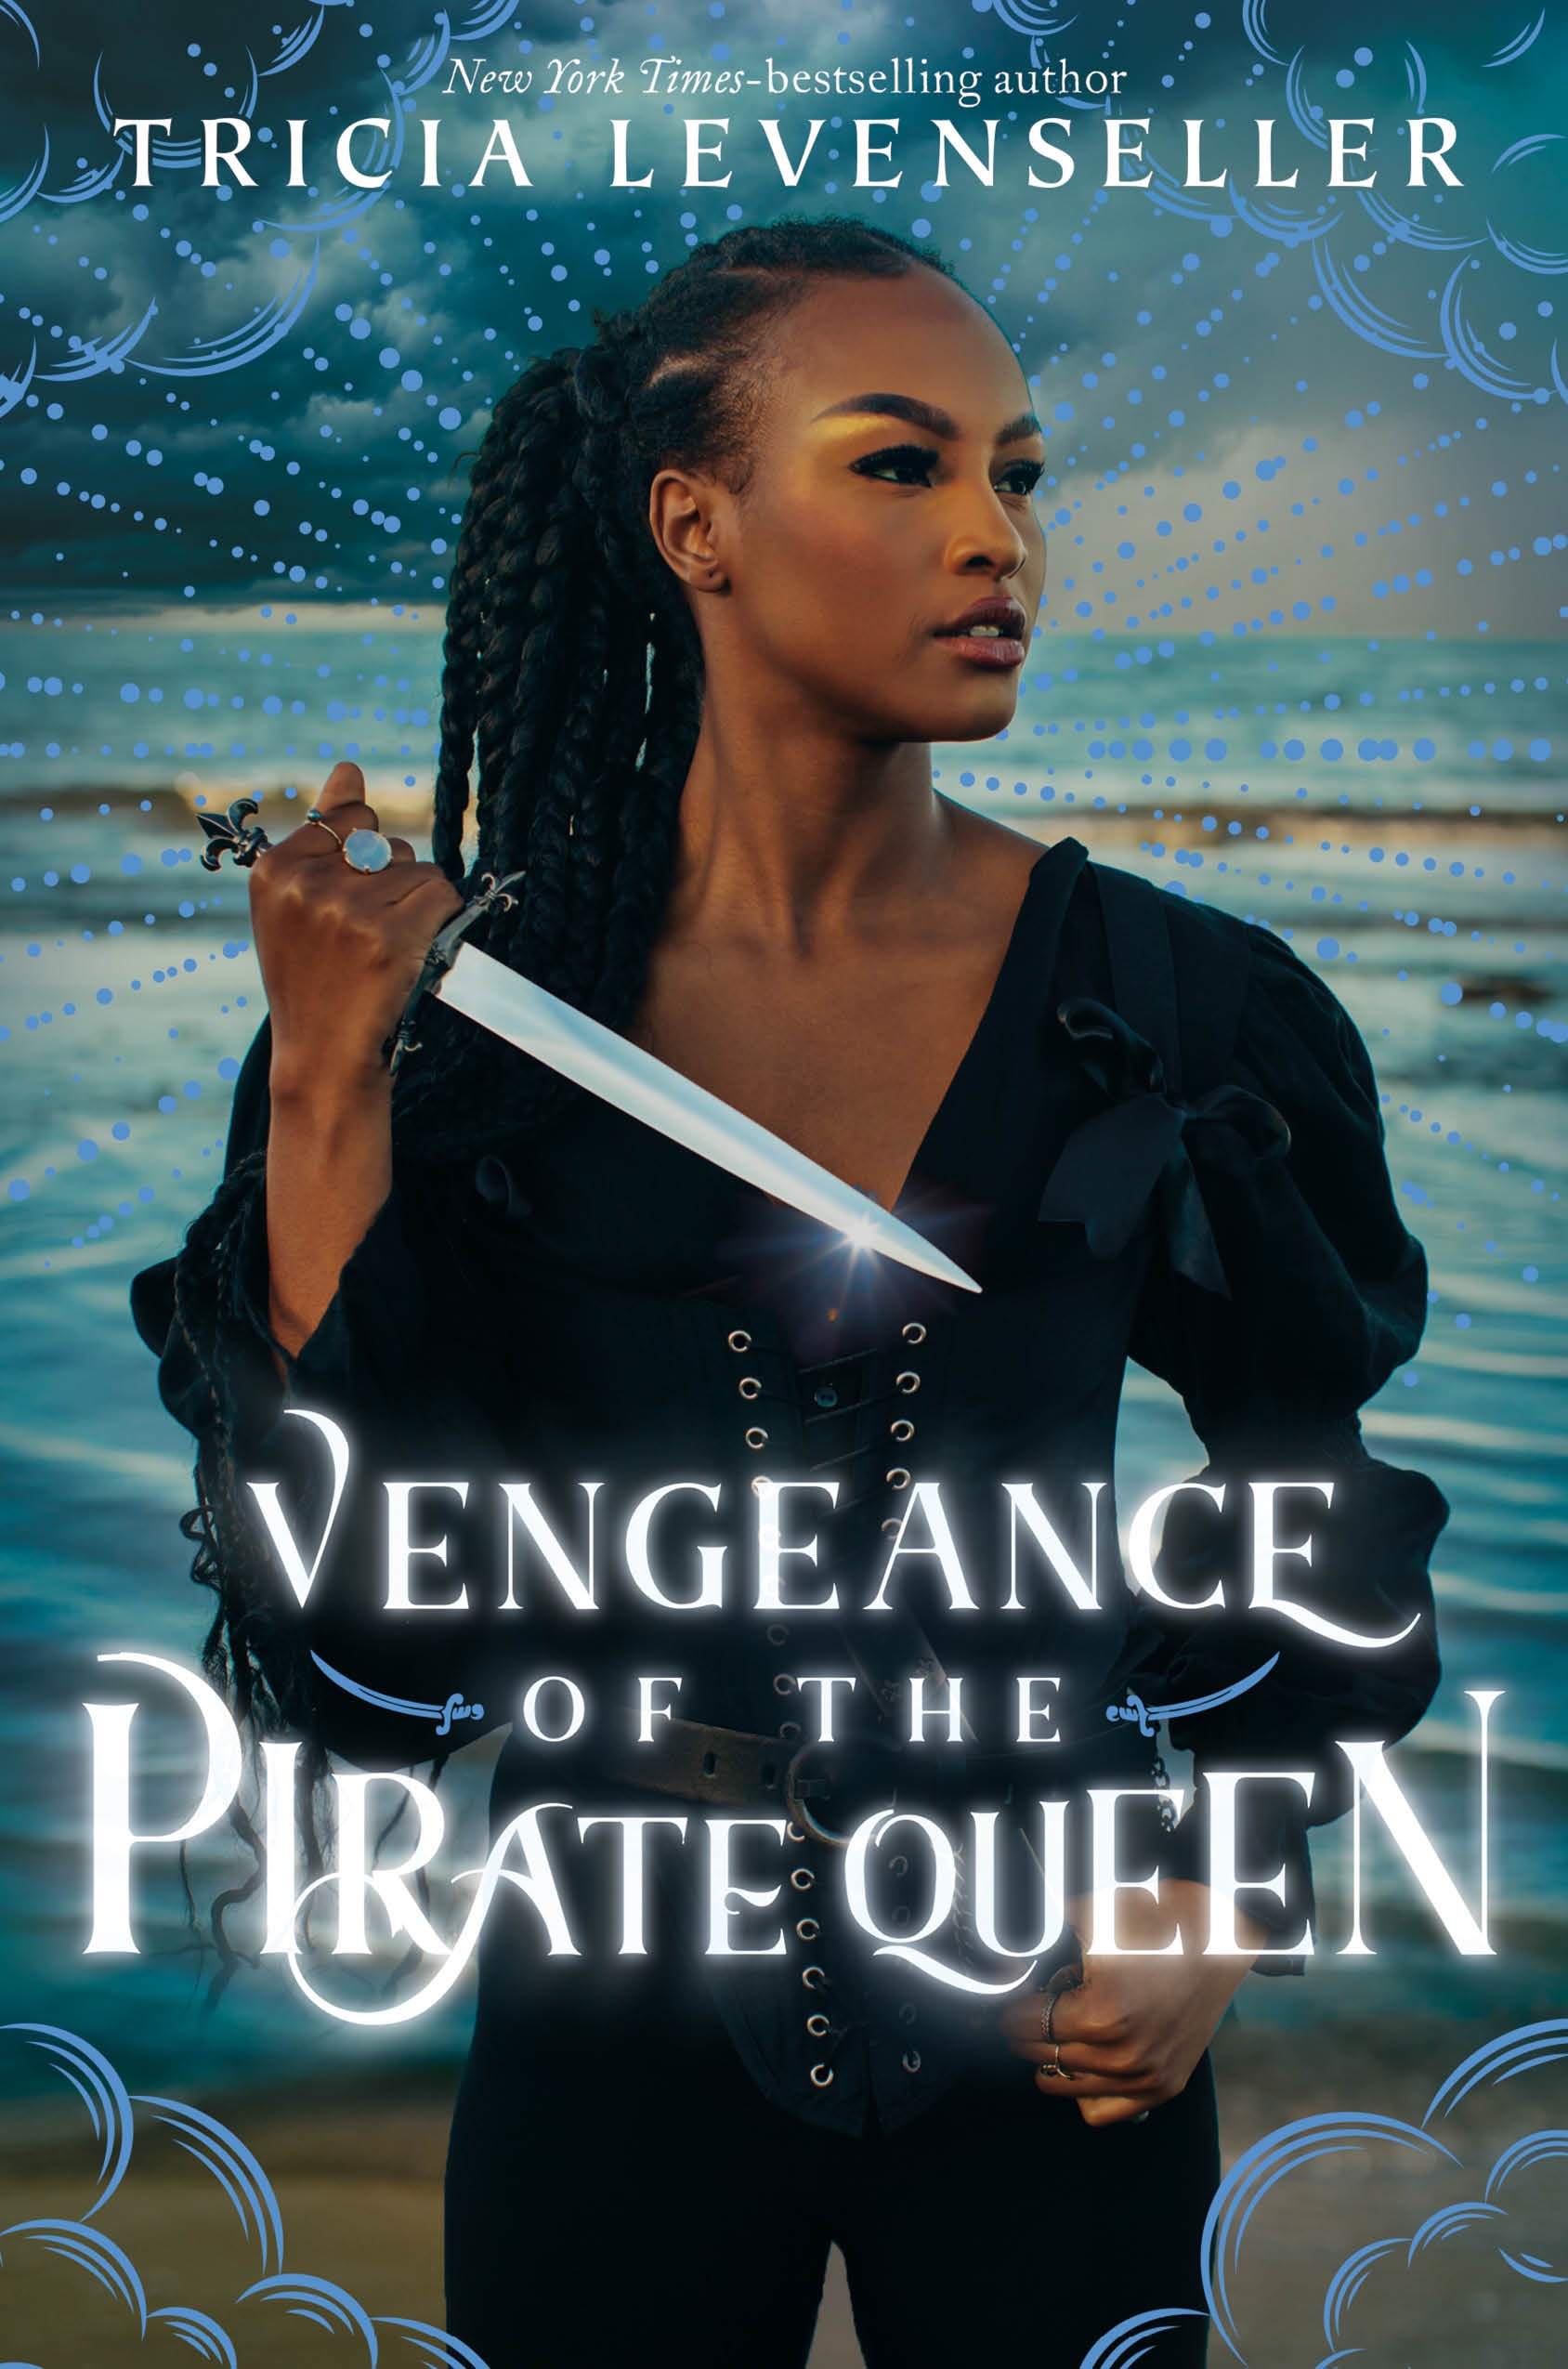 Book Vengeance of the Pirate Queen